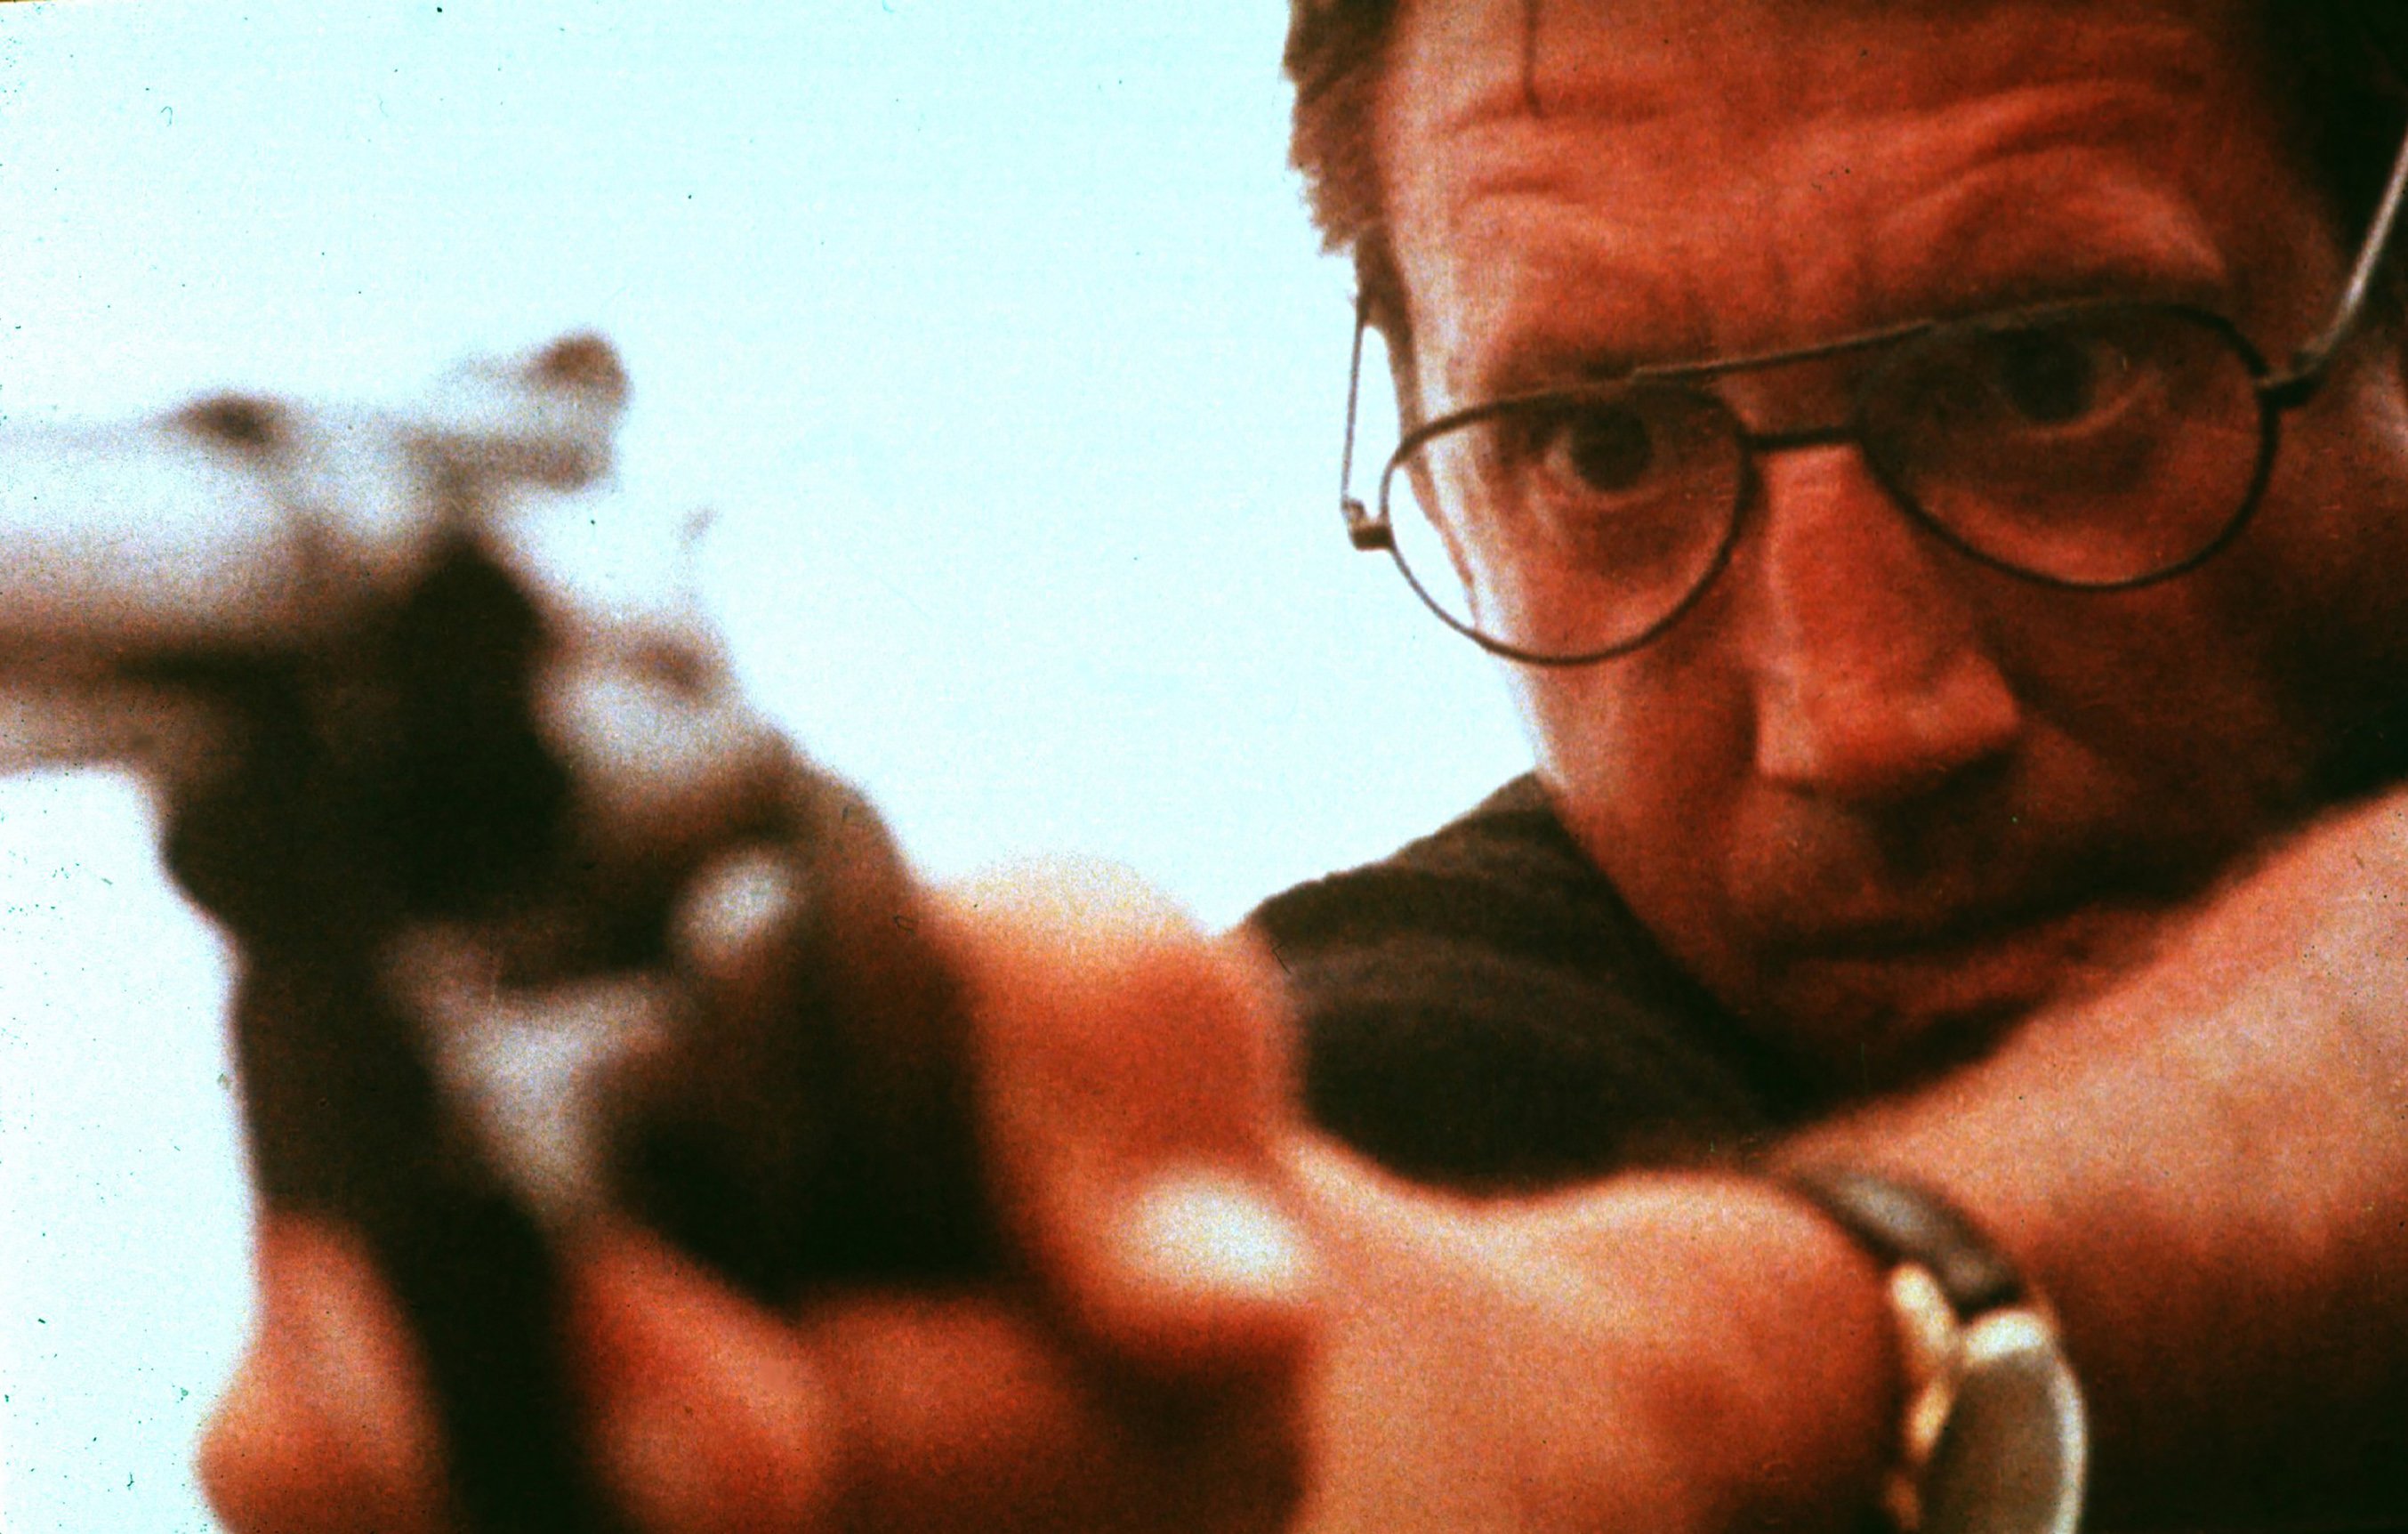 Roy Scheider, as Martin Brody, aims a gun at the shark off screen in one of the final scenes of 'Jaws.'